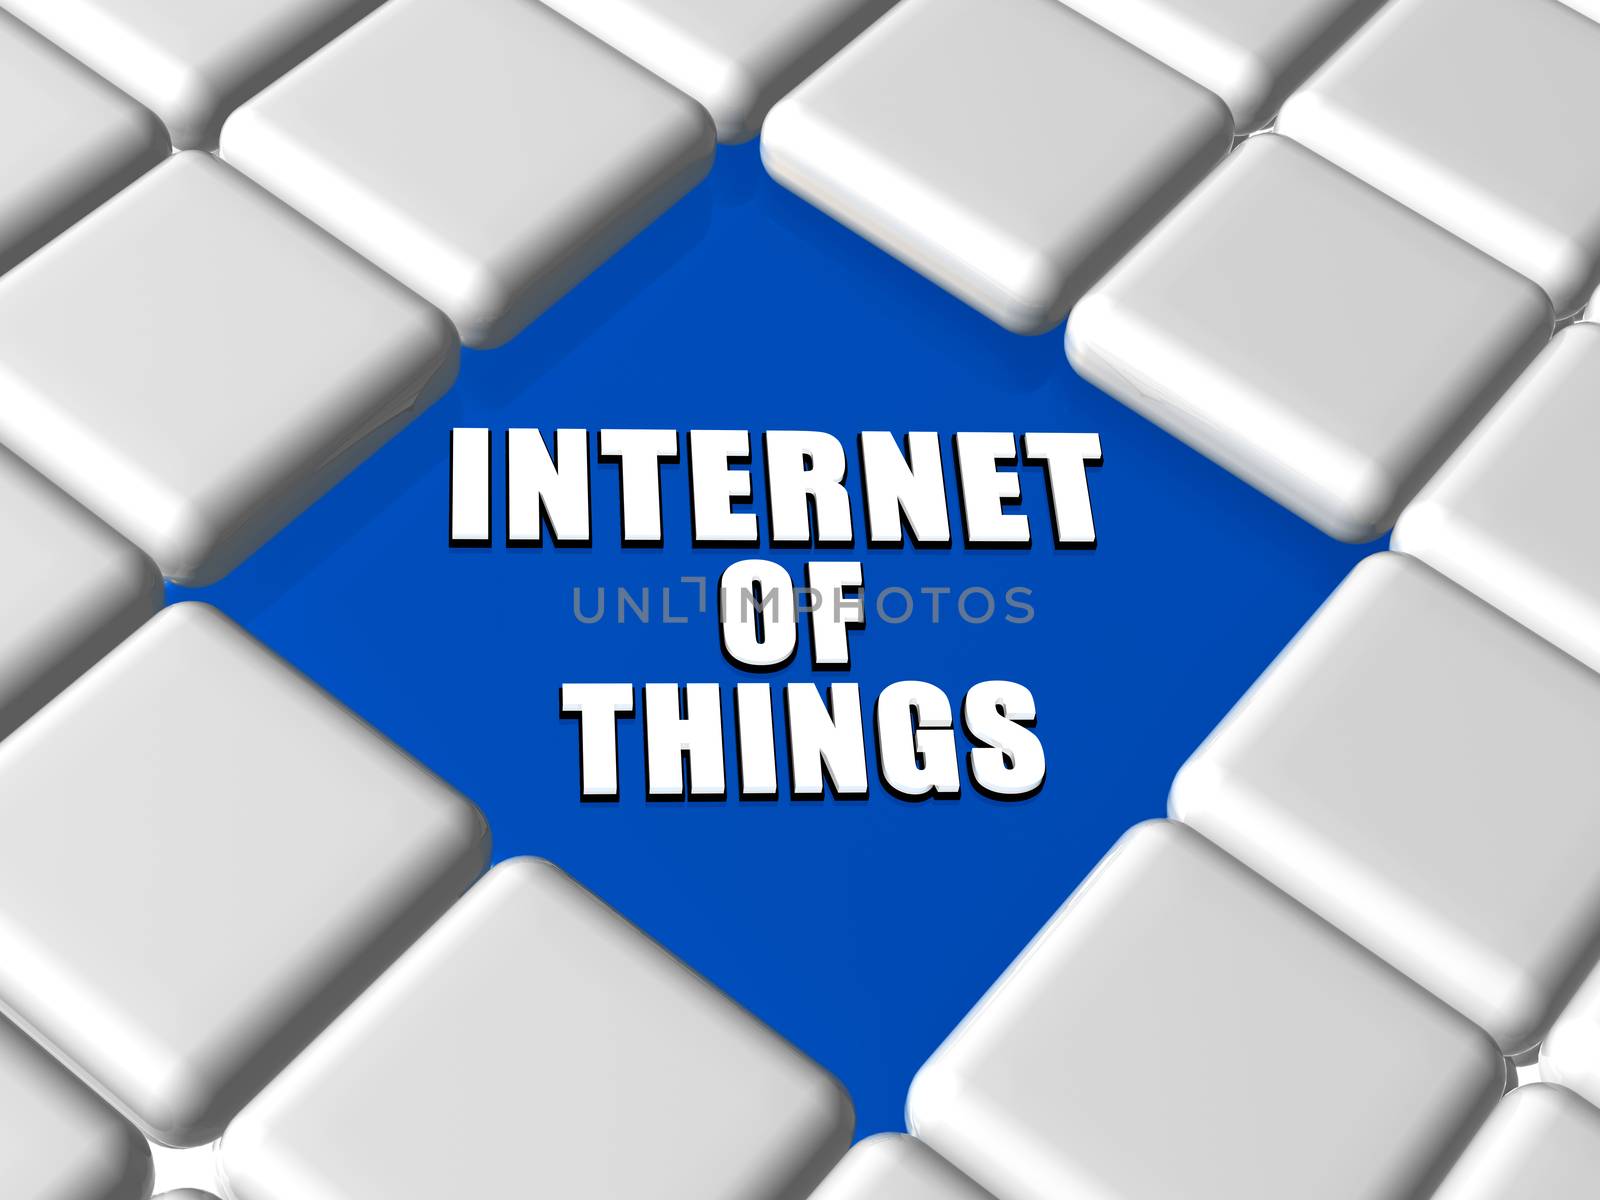 internet of things in boxes by marinini